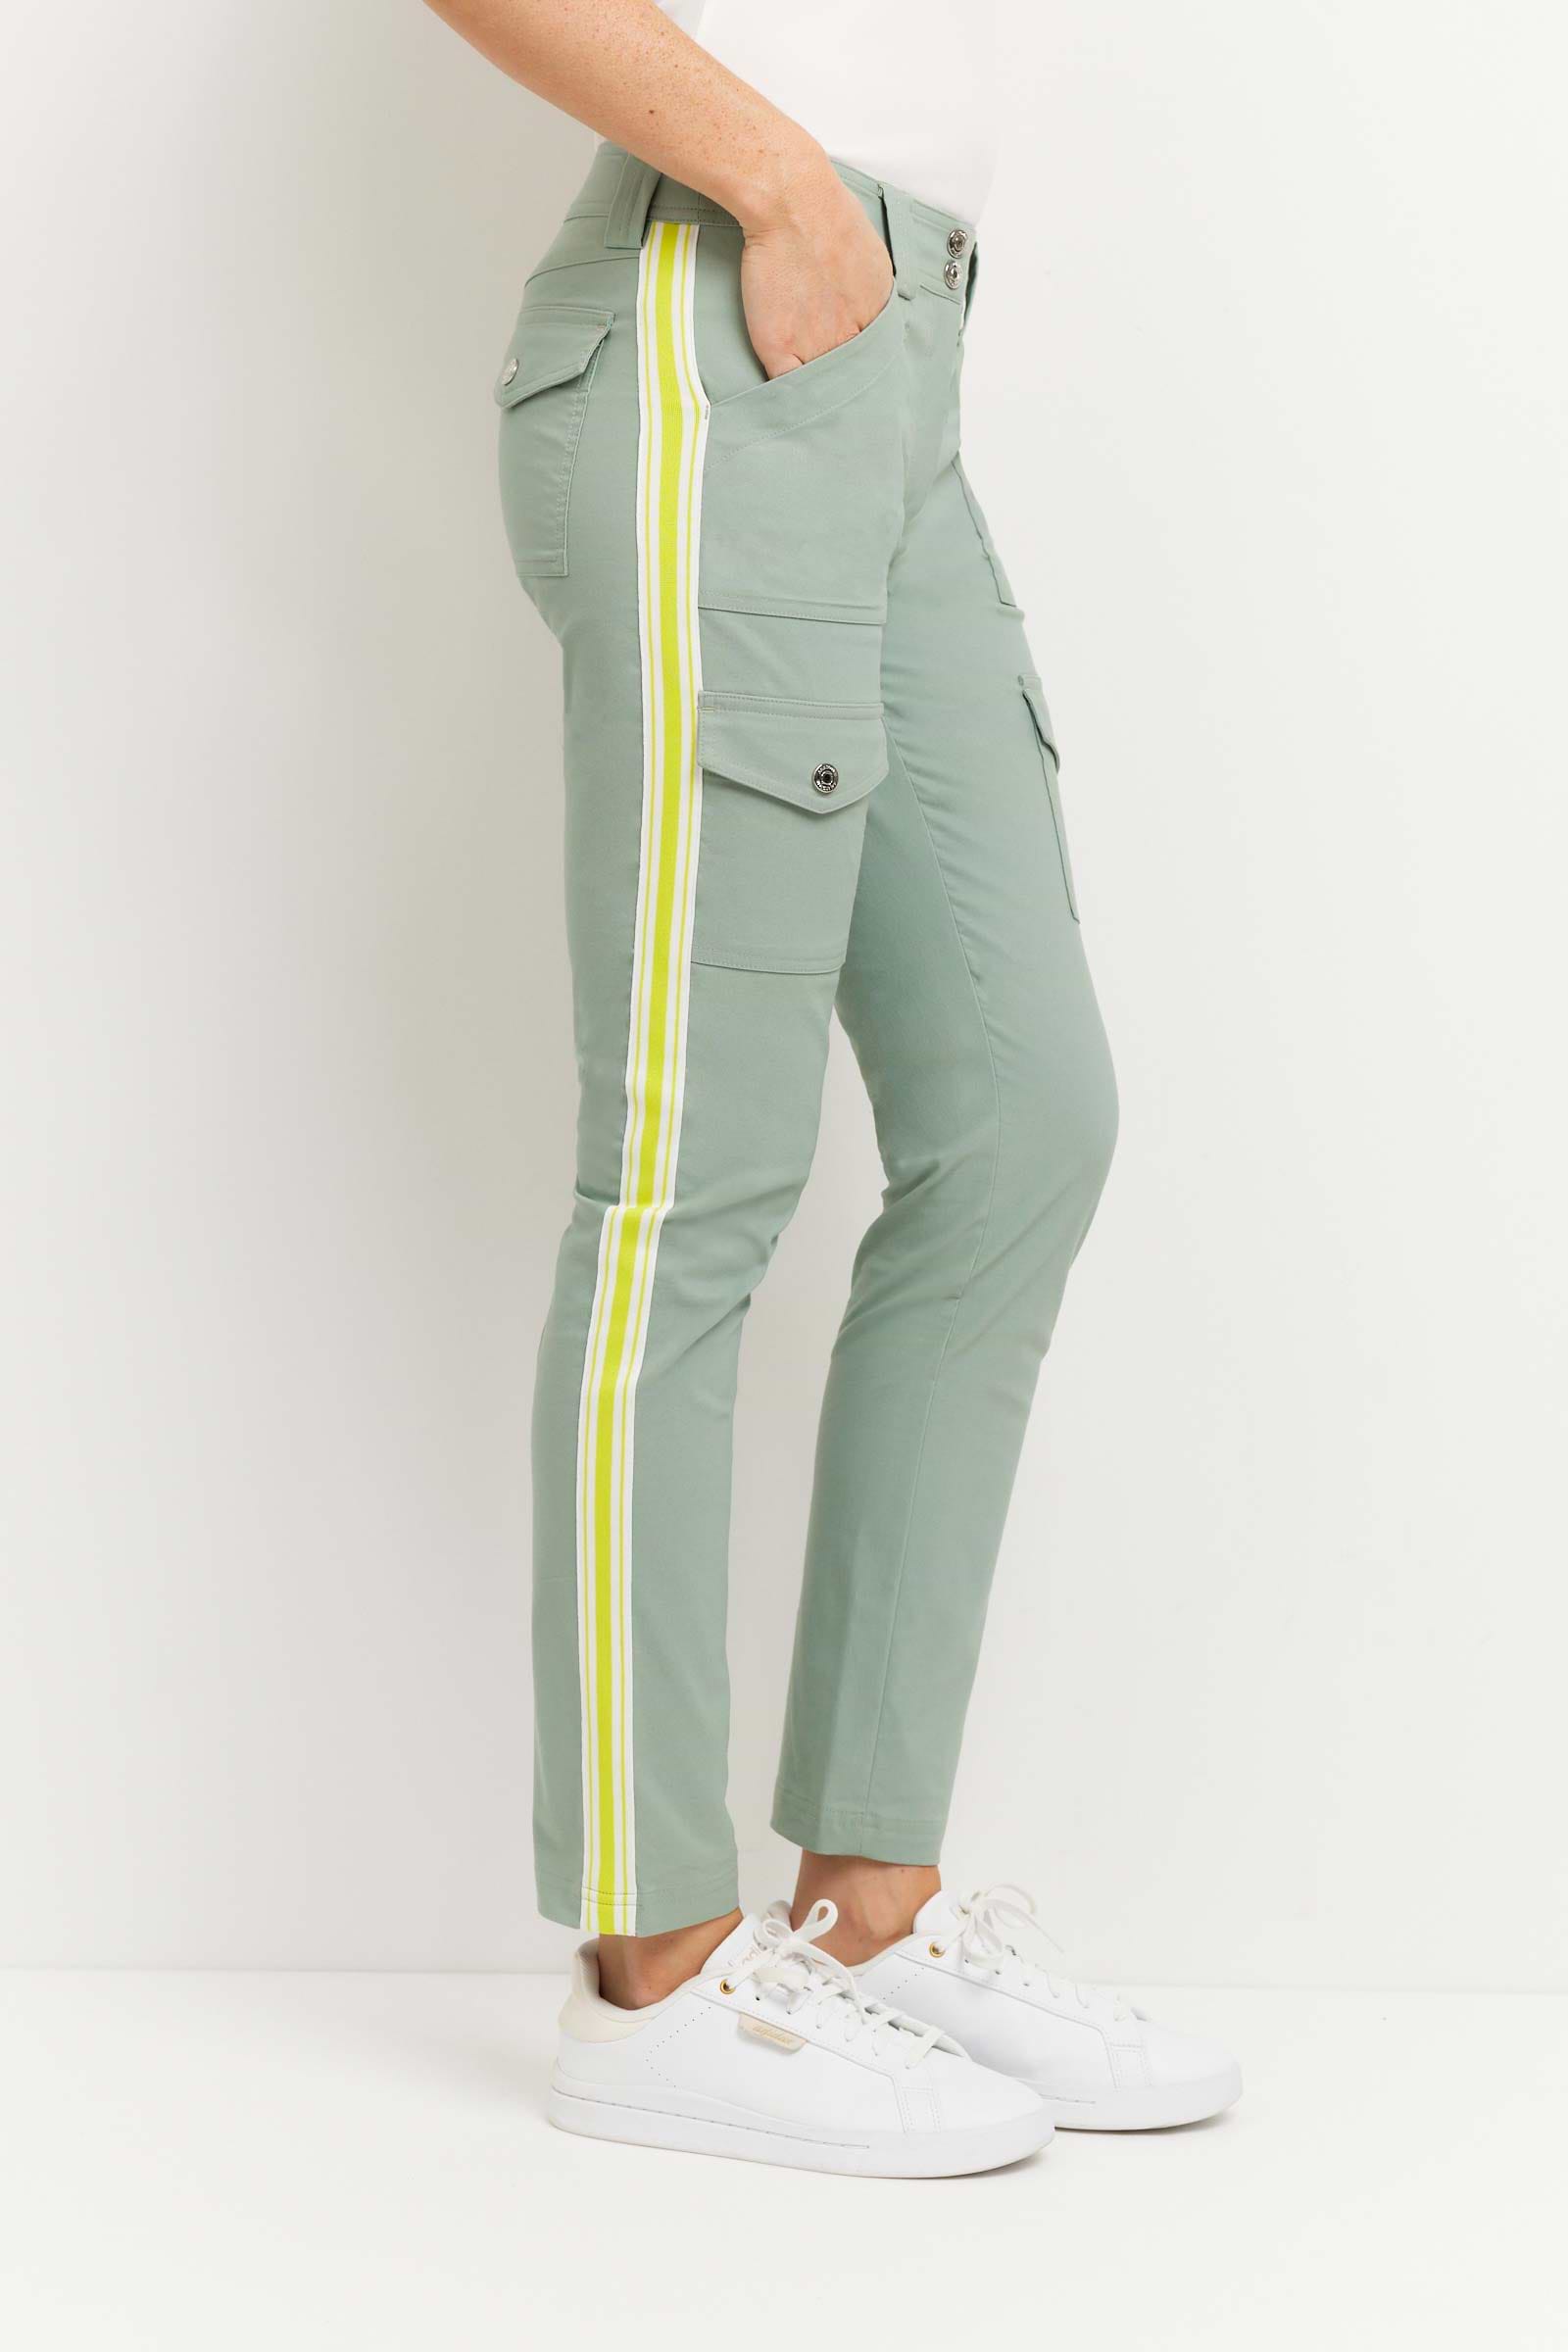 The Best Travel Pants. Woman Showing the Side Profile of a Kate Stripe Pants in Sage.